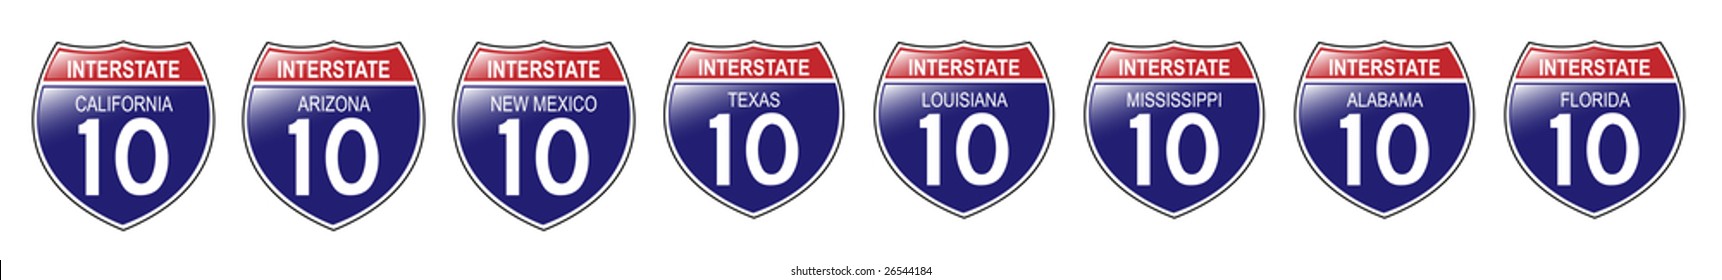 United States Interstate 10 Signs, from California to Florida, with reflective-looking surface.